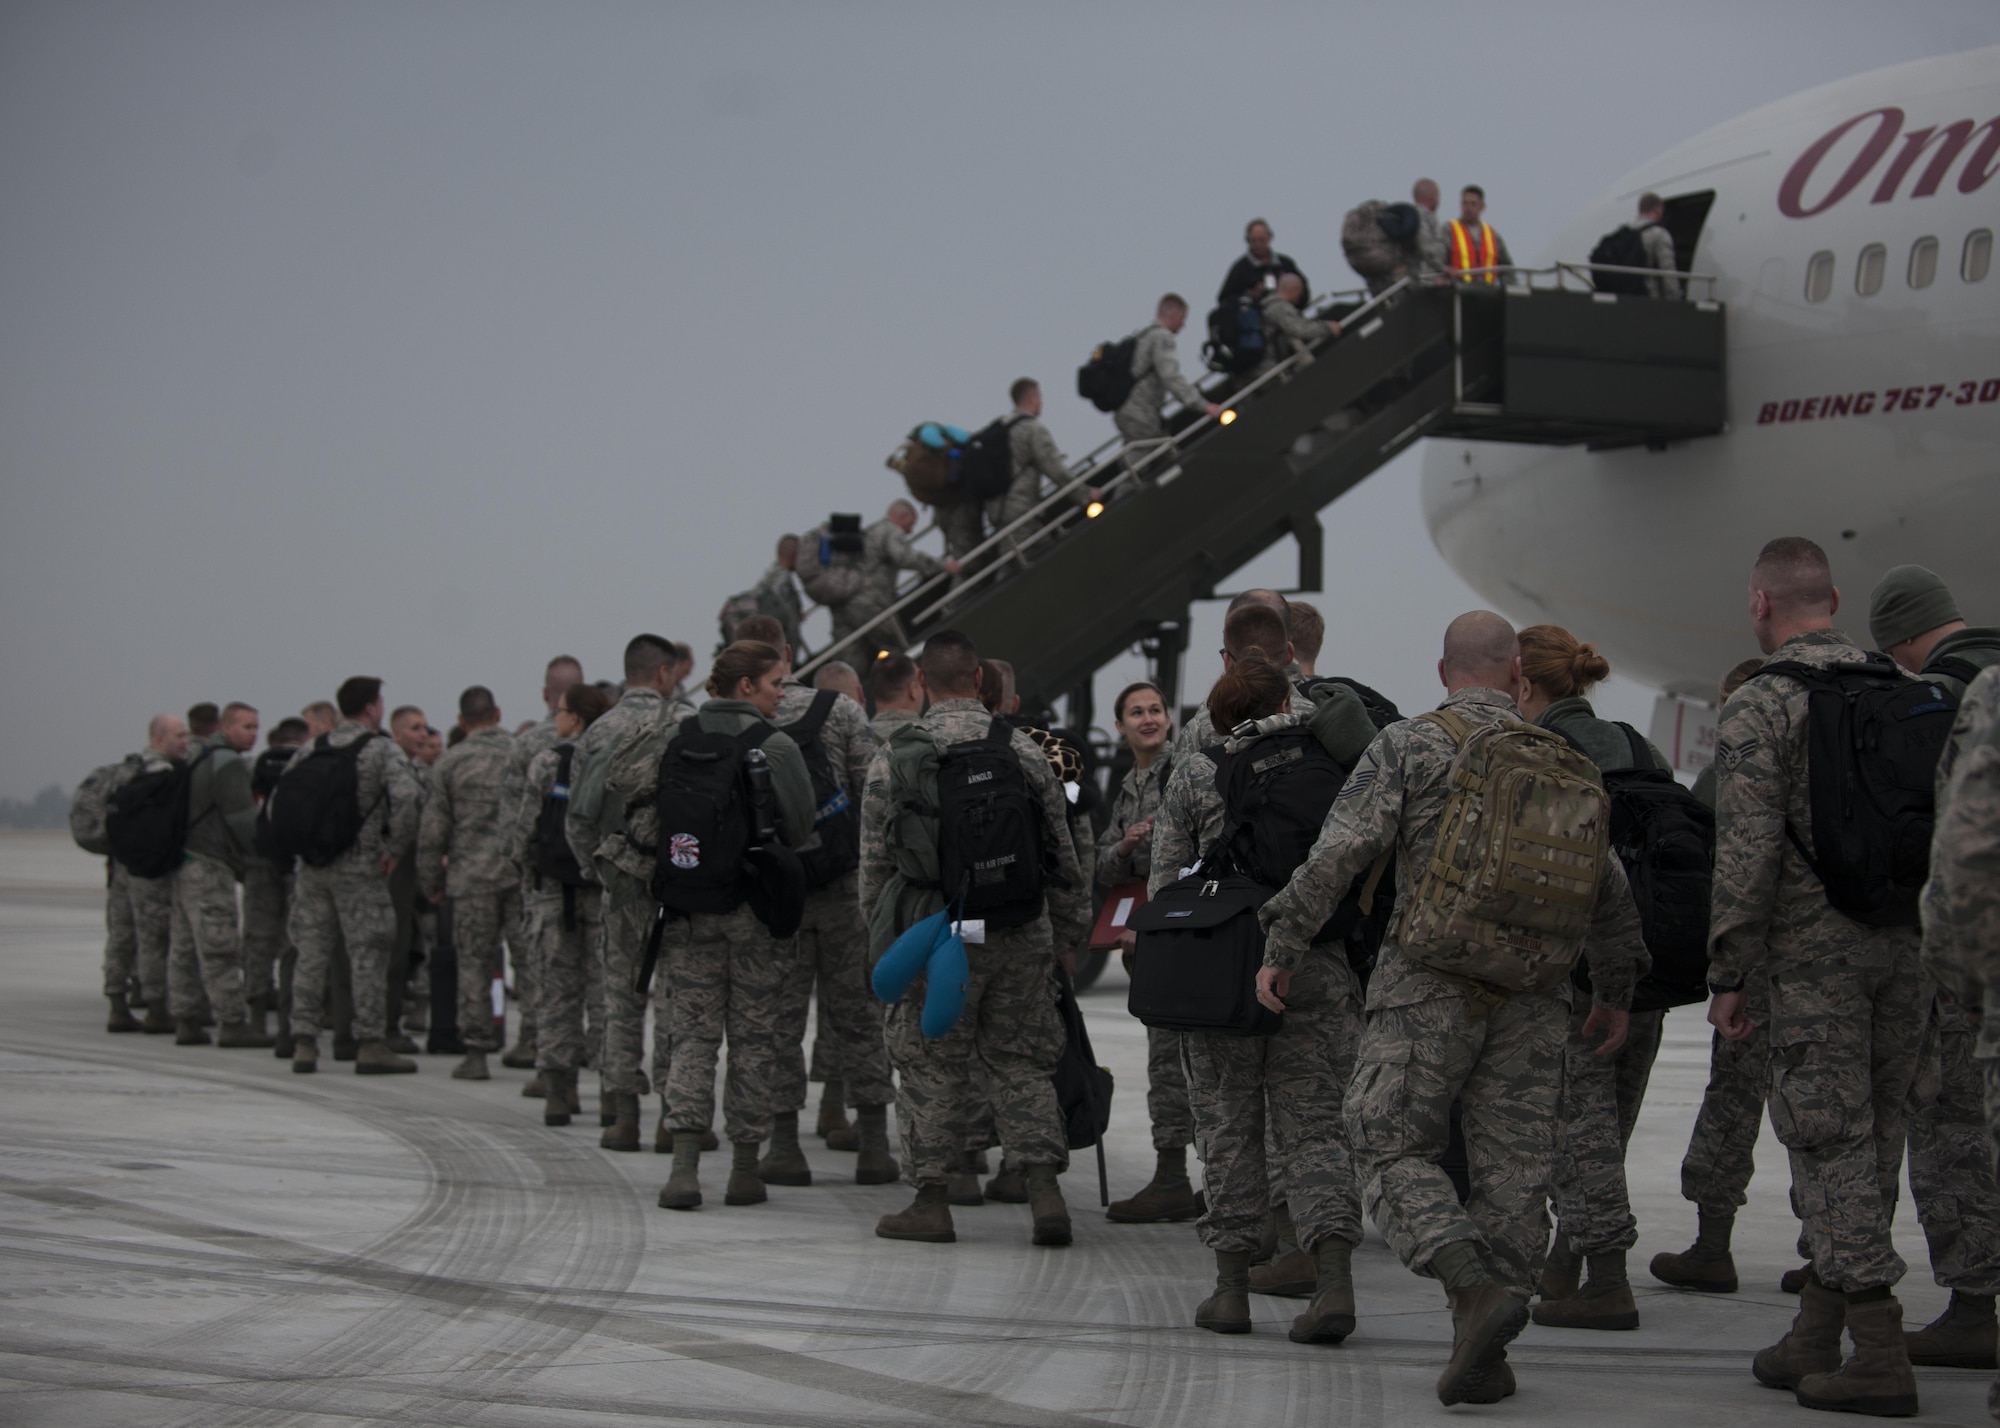 U.S. Air Force Airmen assigned to the Wisconsin Air National Guard 115th Fighter Wing, board their flight home as they prepare to depart the installation at Kunsan Air Base, Republic of Korea, Nov. 8, 2017.  The 115th FW participated in a three-month Theater Security Package rotational Deployment to Kunsan AB as part of maintaining peace and security in the Indo-Asia-Pacific region. (U.S. Air Force photo by Staff Sgt. Victoria H. Taylor)